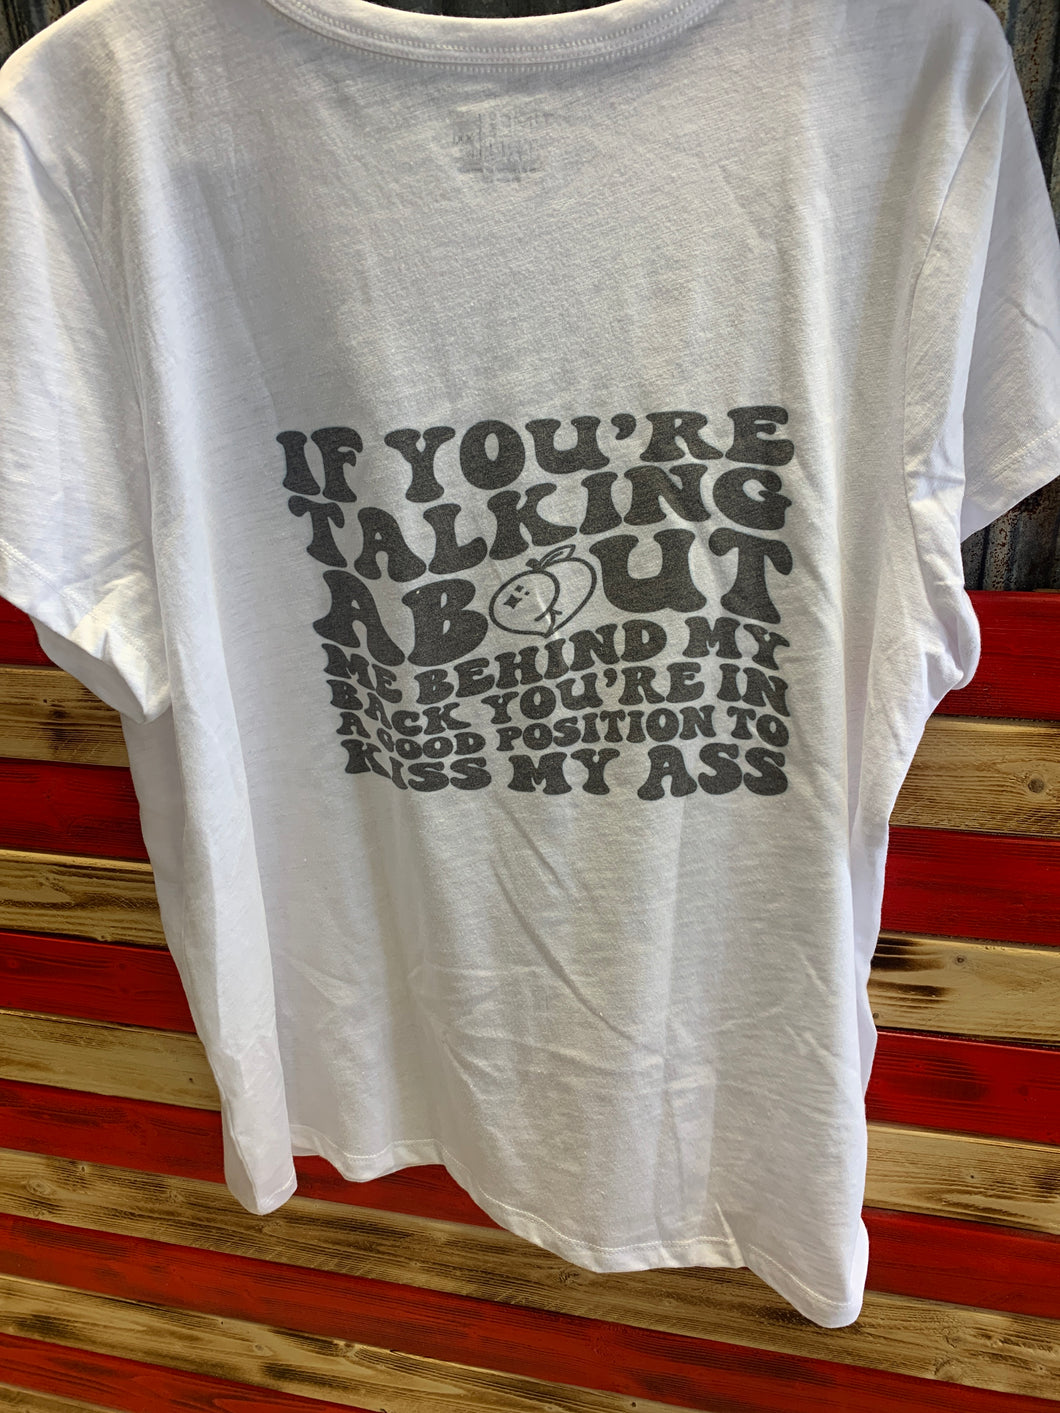 If you’re talking about t-shirt